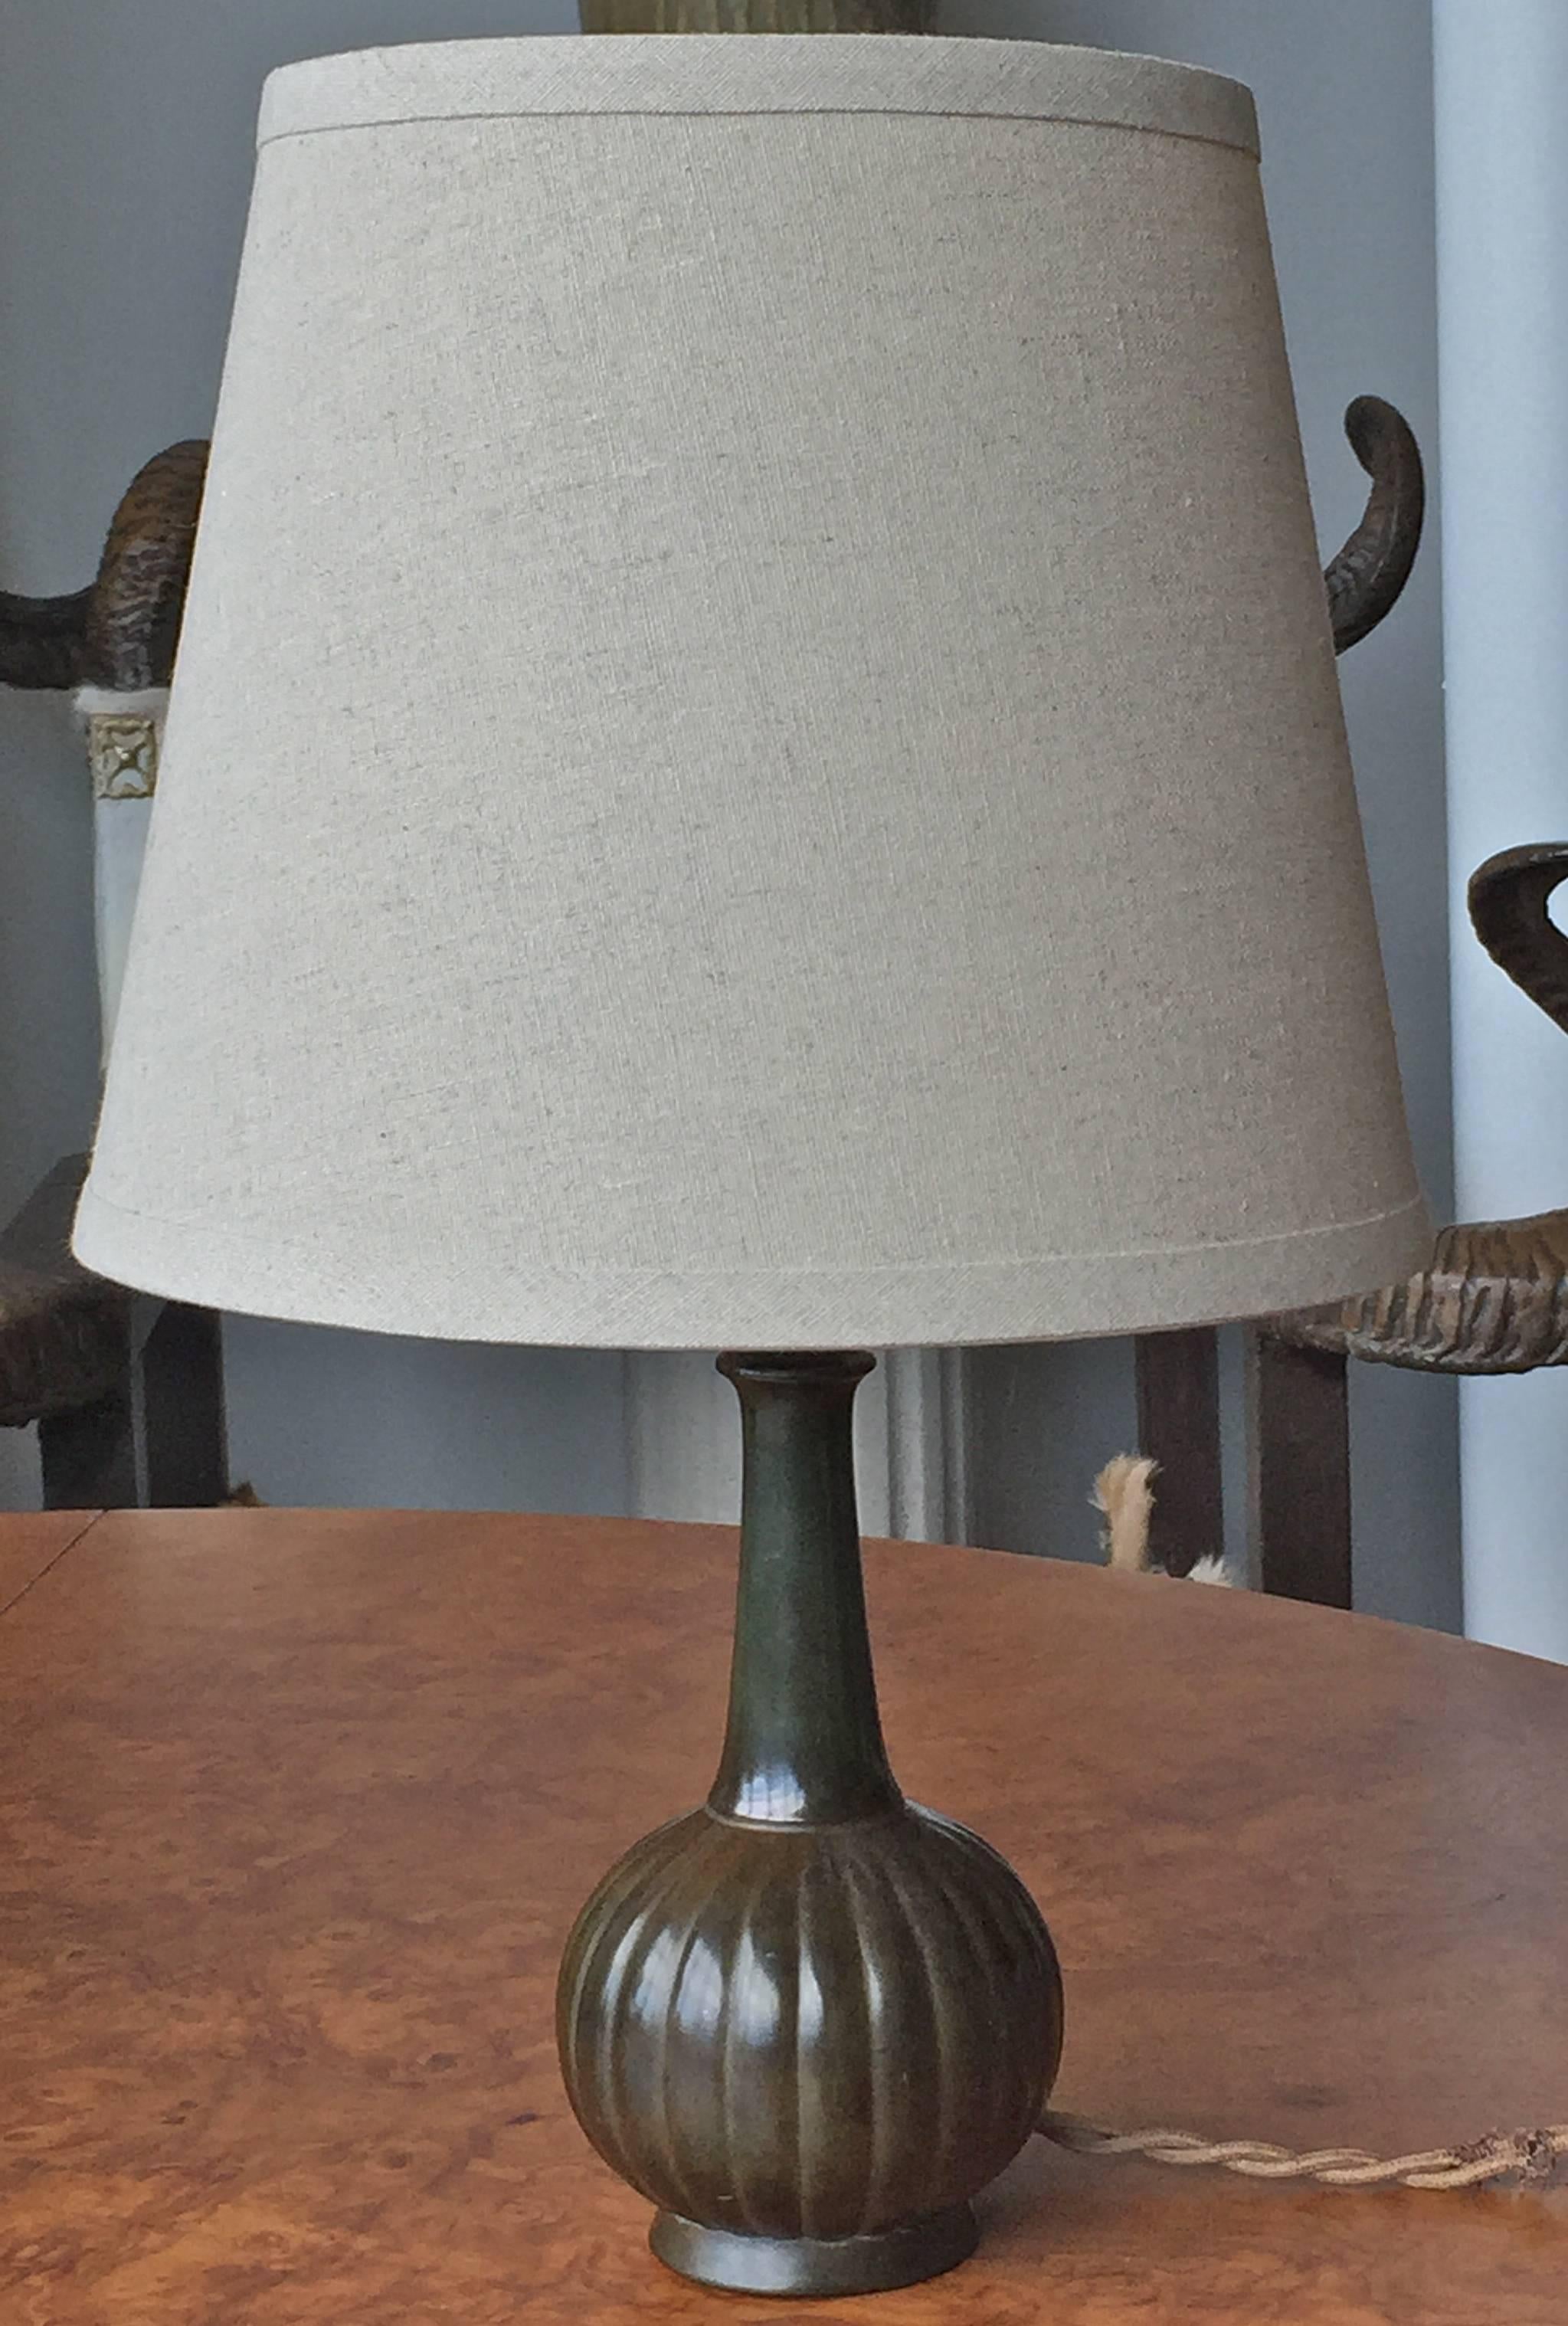 A table lamp designed by Just Andersen, Denmark, circa 1930s.
Patinated disco metal. Marked: Just Denmark D140.
Need to be electrify. Rewiring available upon request.
Dimensions: H 16